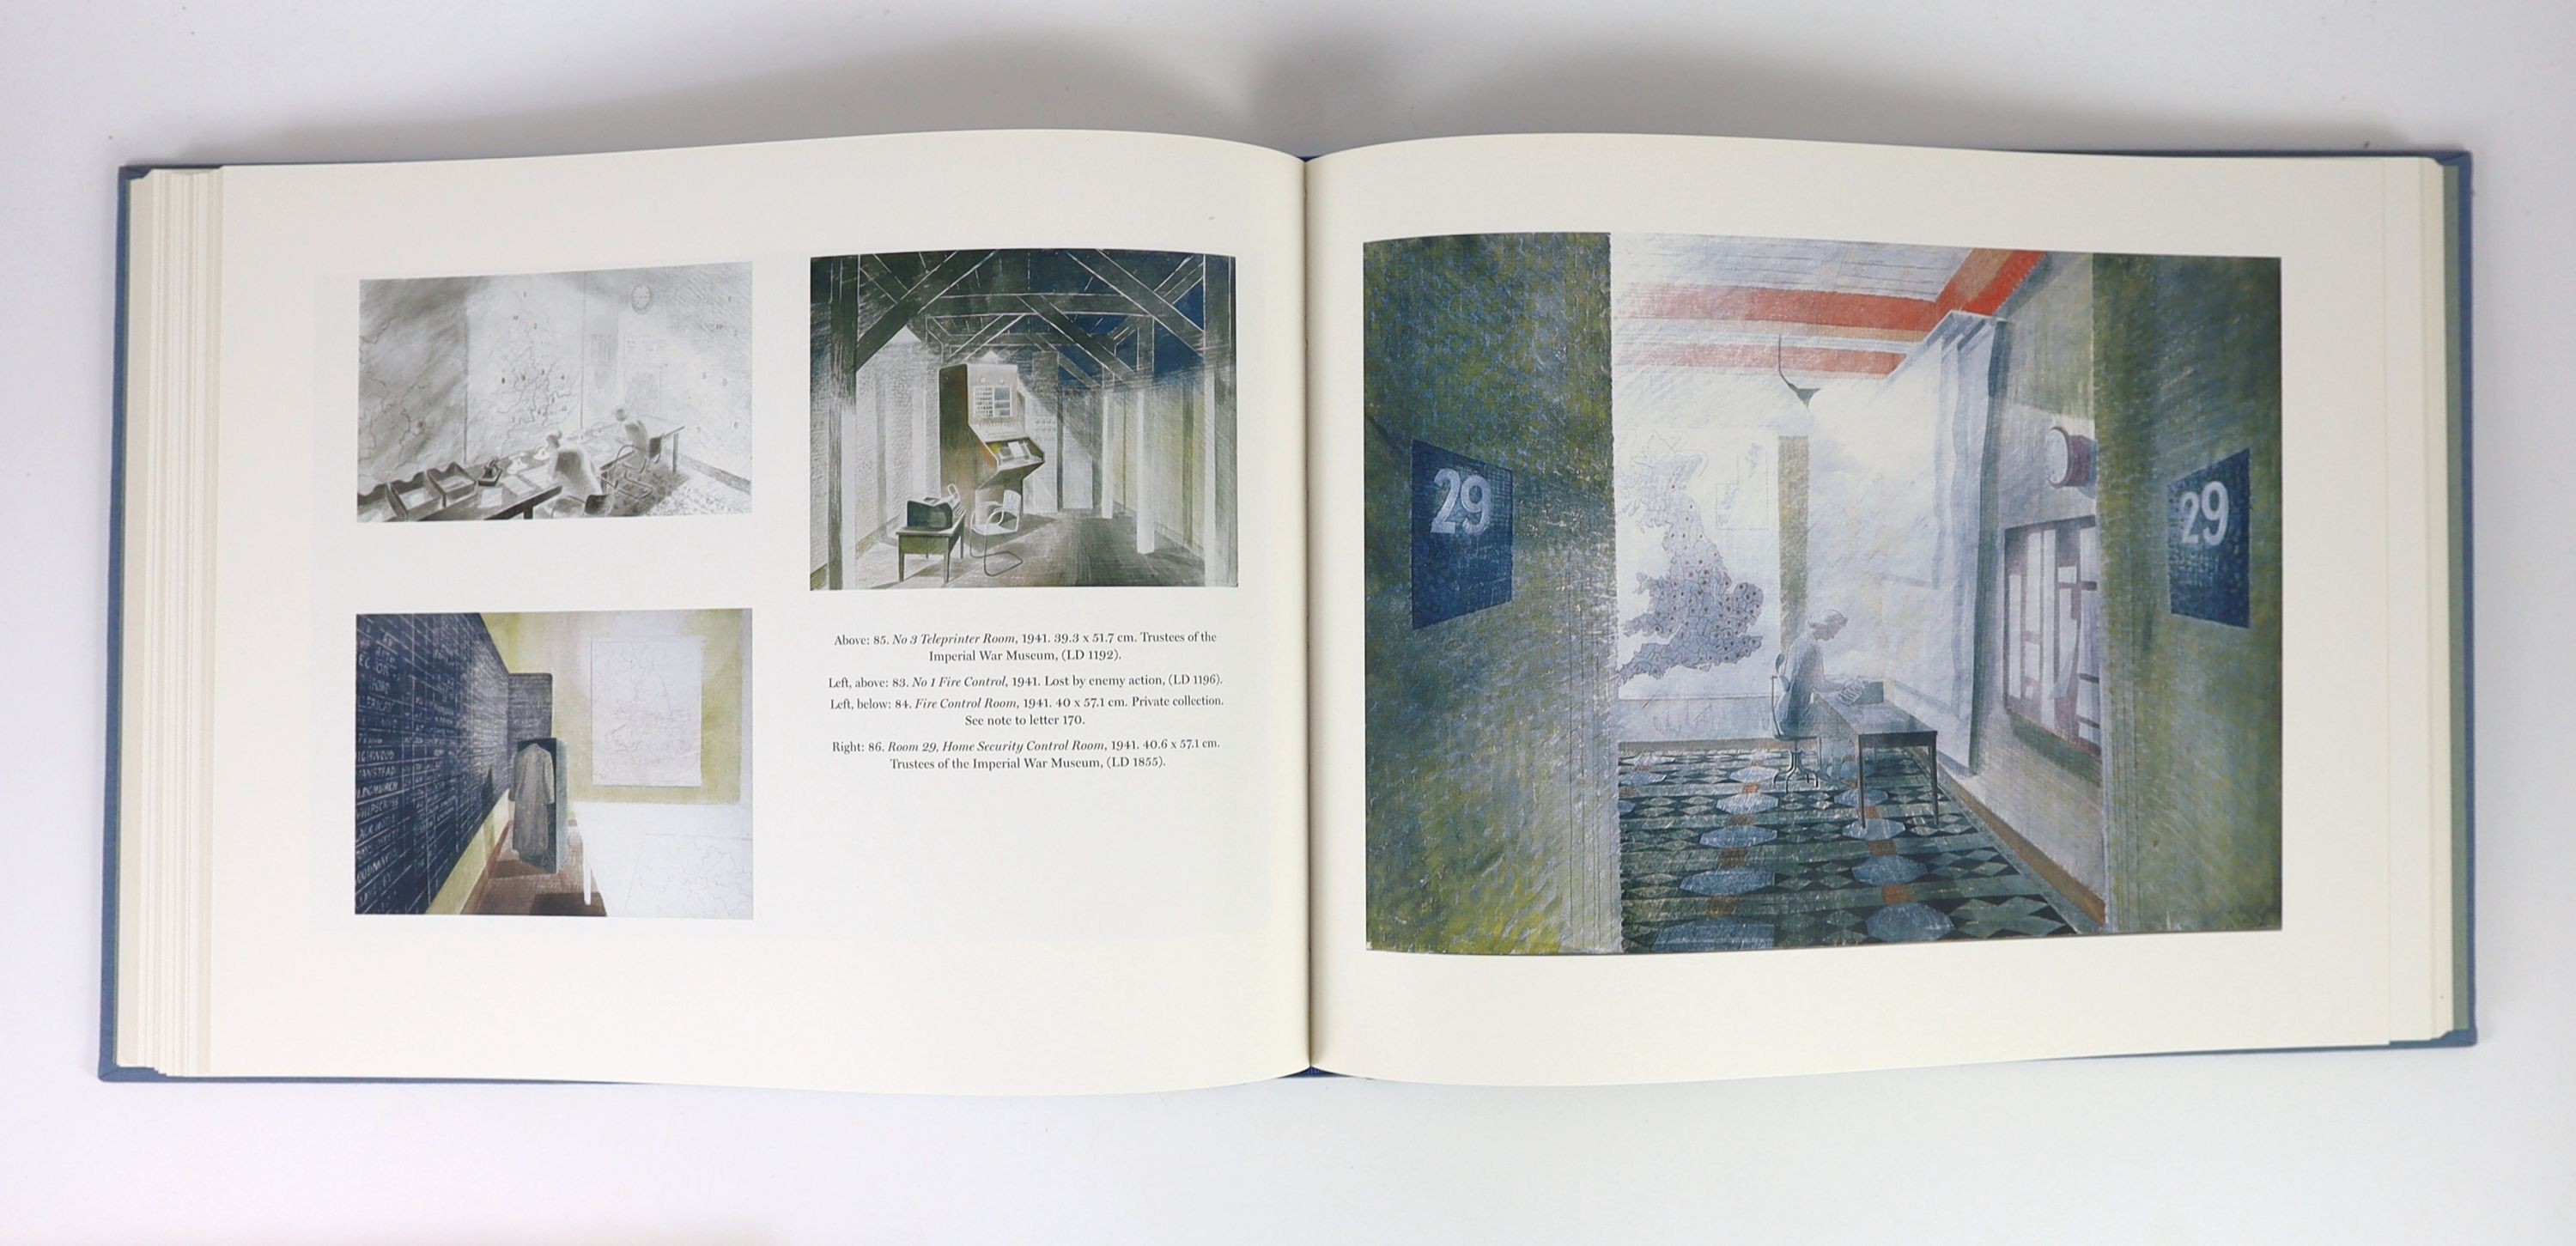 Ullmann, Anne [ed.] - Ravilious at War. 1st and limited edition, one of 750. Adorned with coloured frontispiece and numerous illustrations, many coloured. Half title and dedication pages. Original cloth with title label